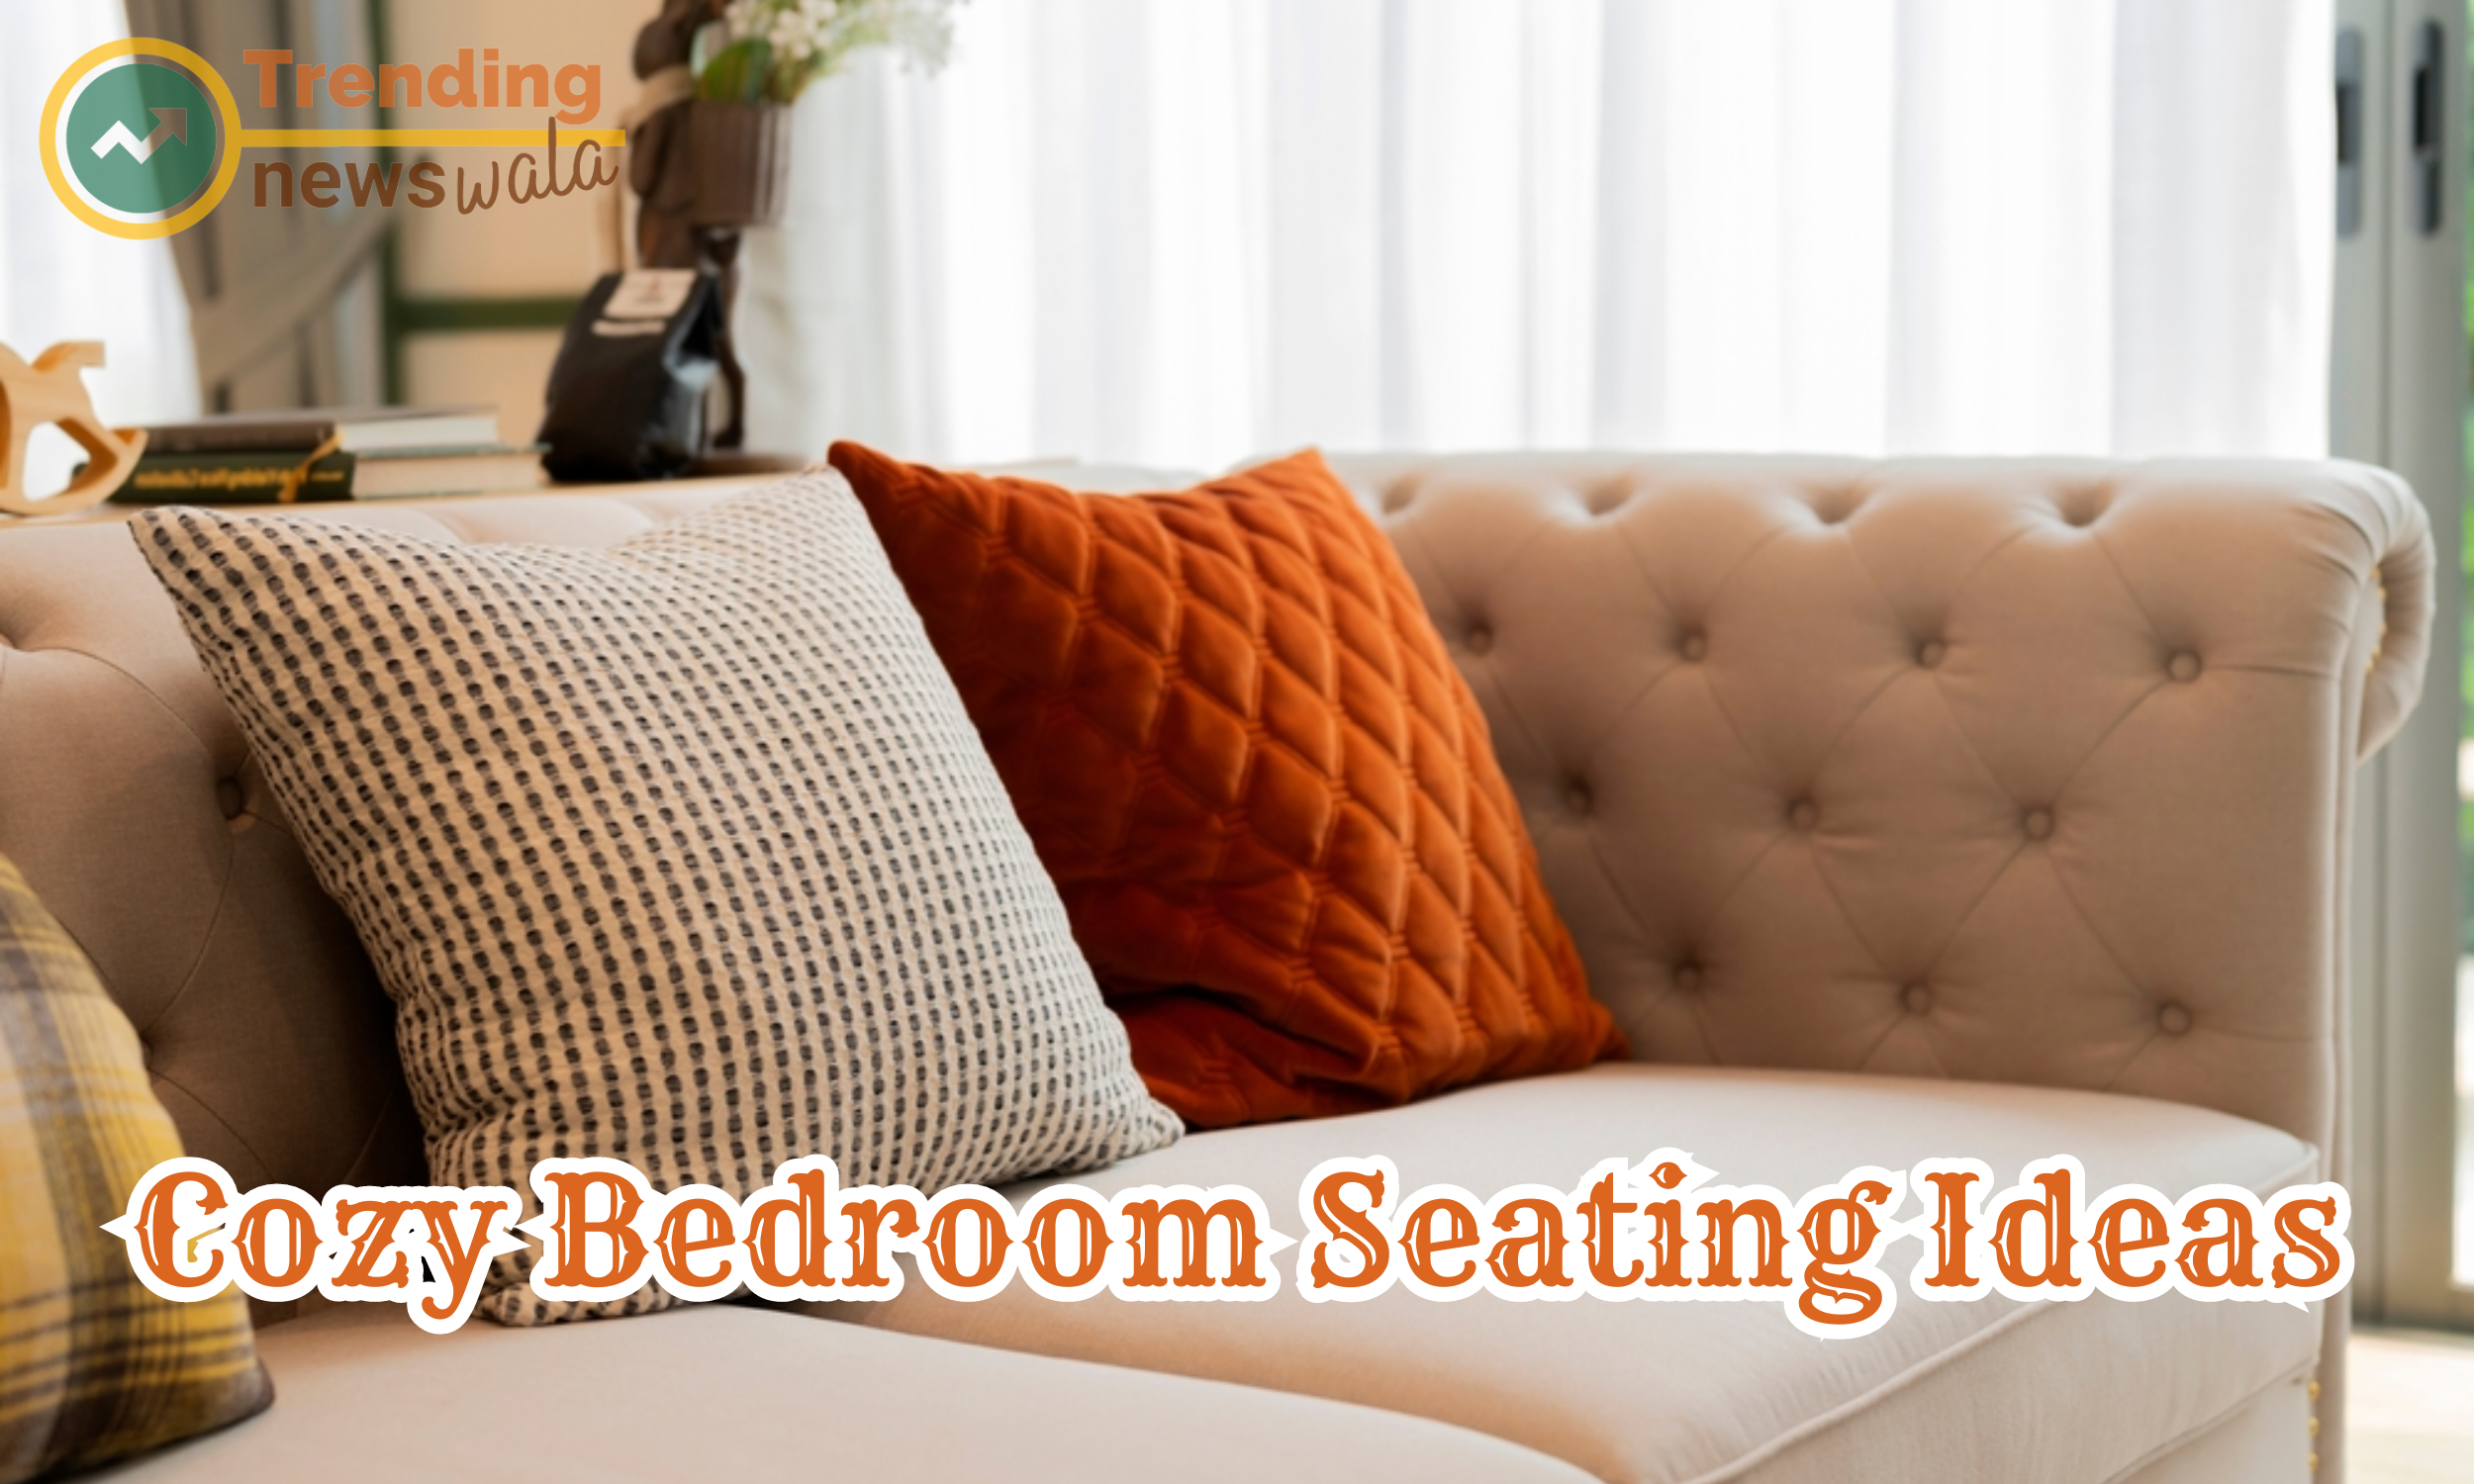 What Is The Most Comfortable Bedroom Furniture